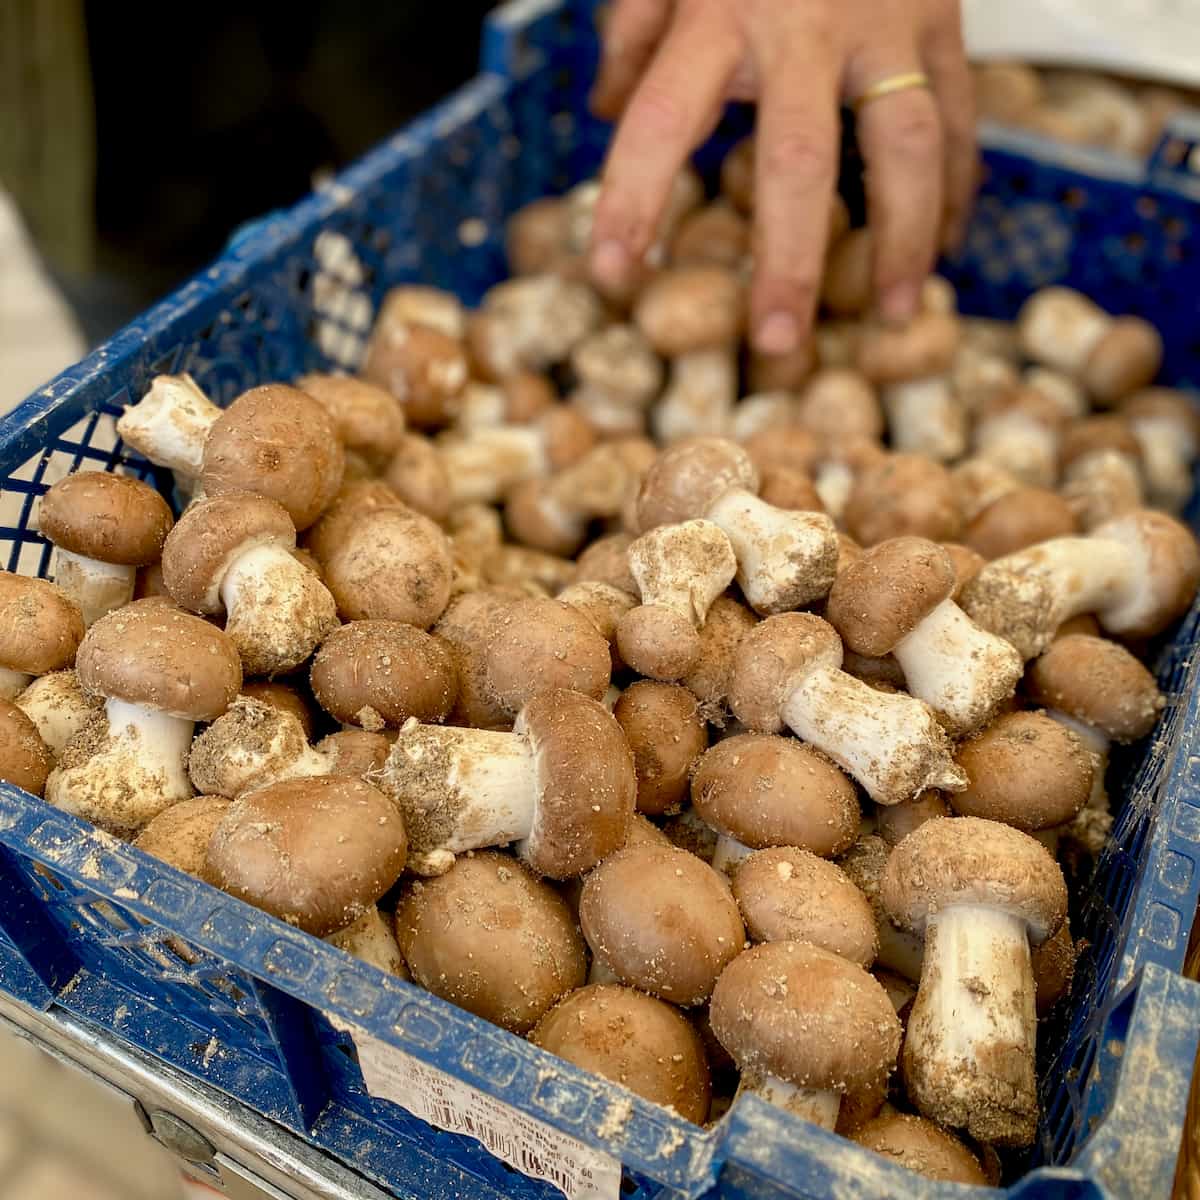 crate of Parisian chestnut mushrooms at the French market